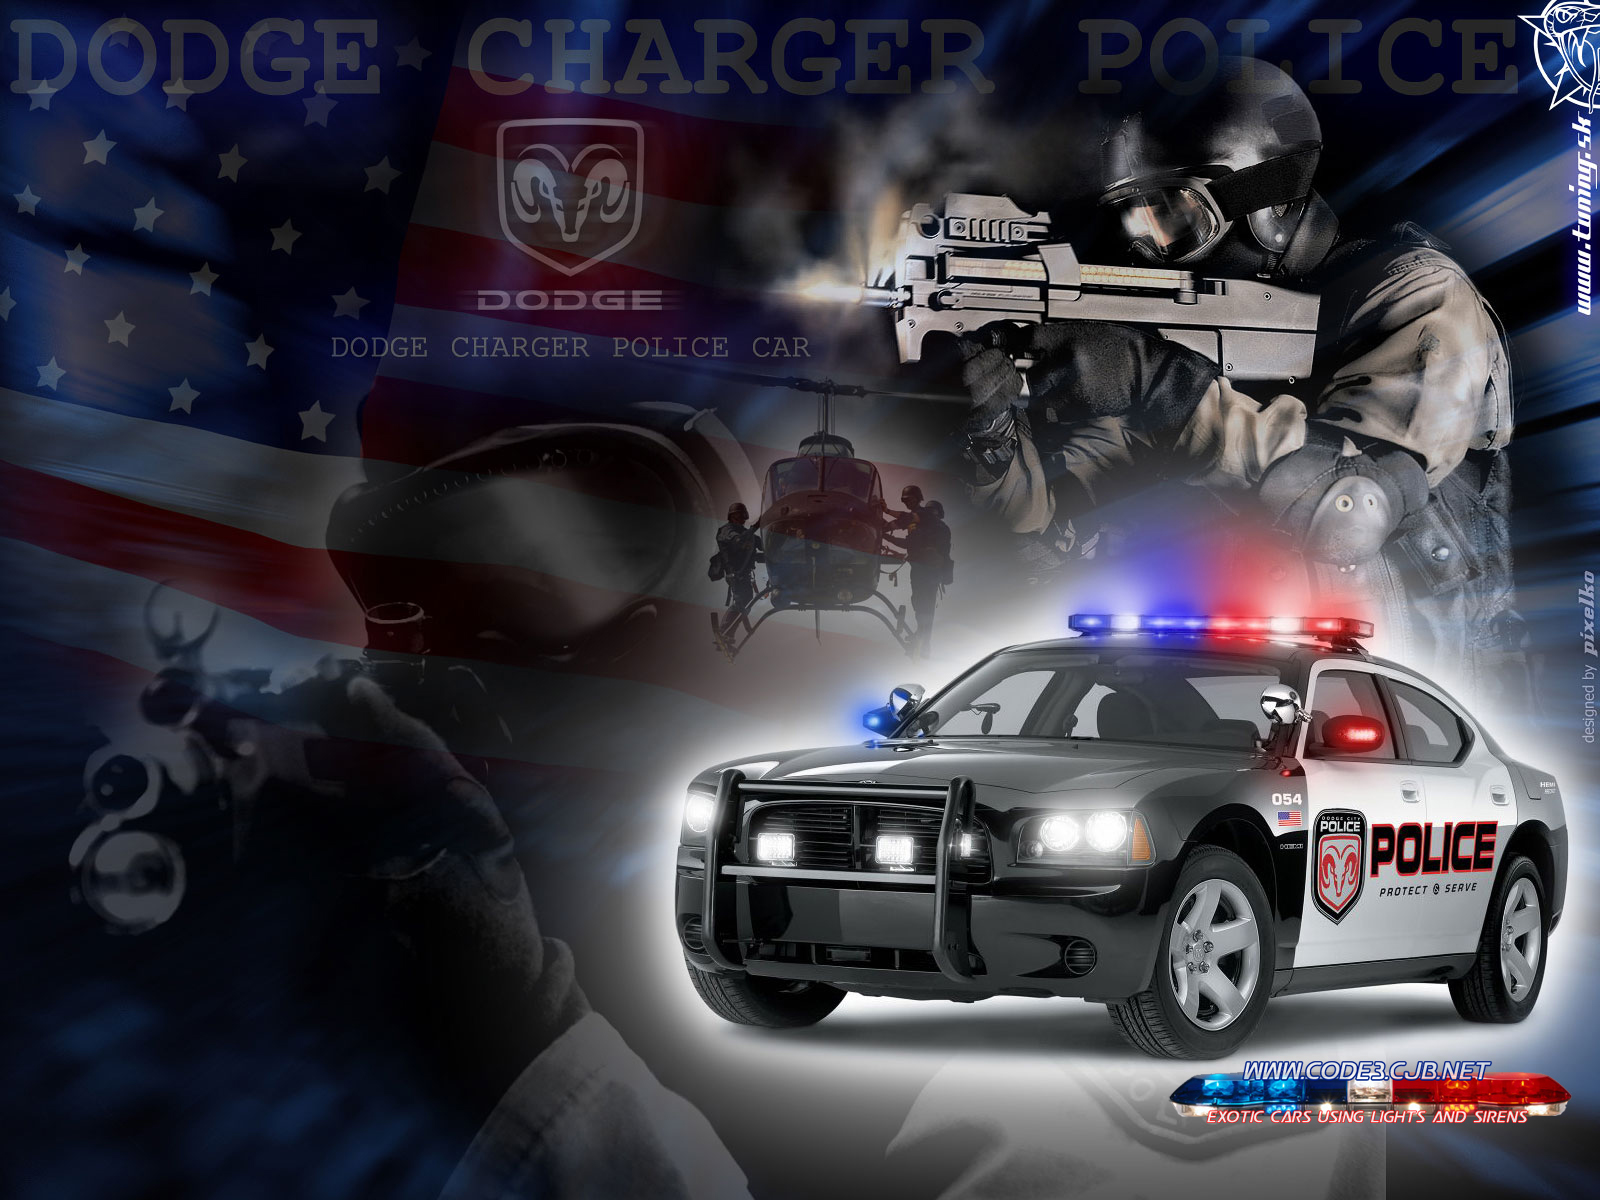 Used Sport Car 2011 dodge police charger wallpapers and prices